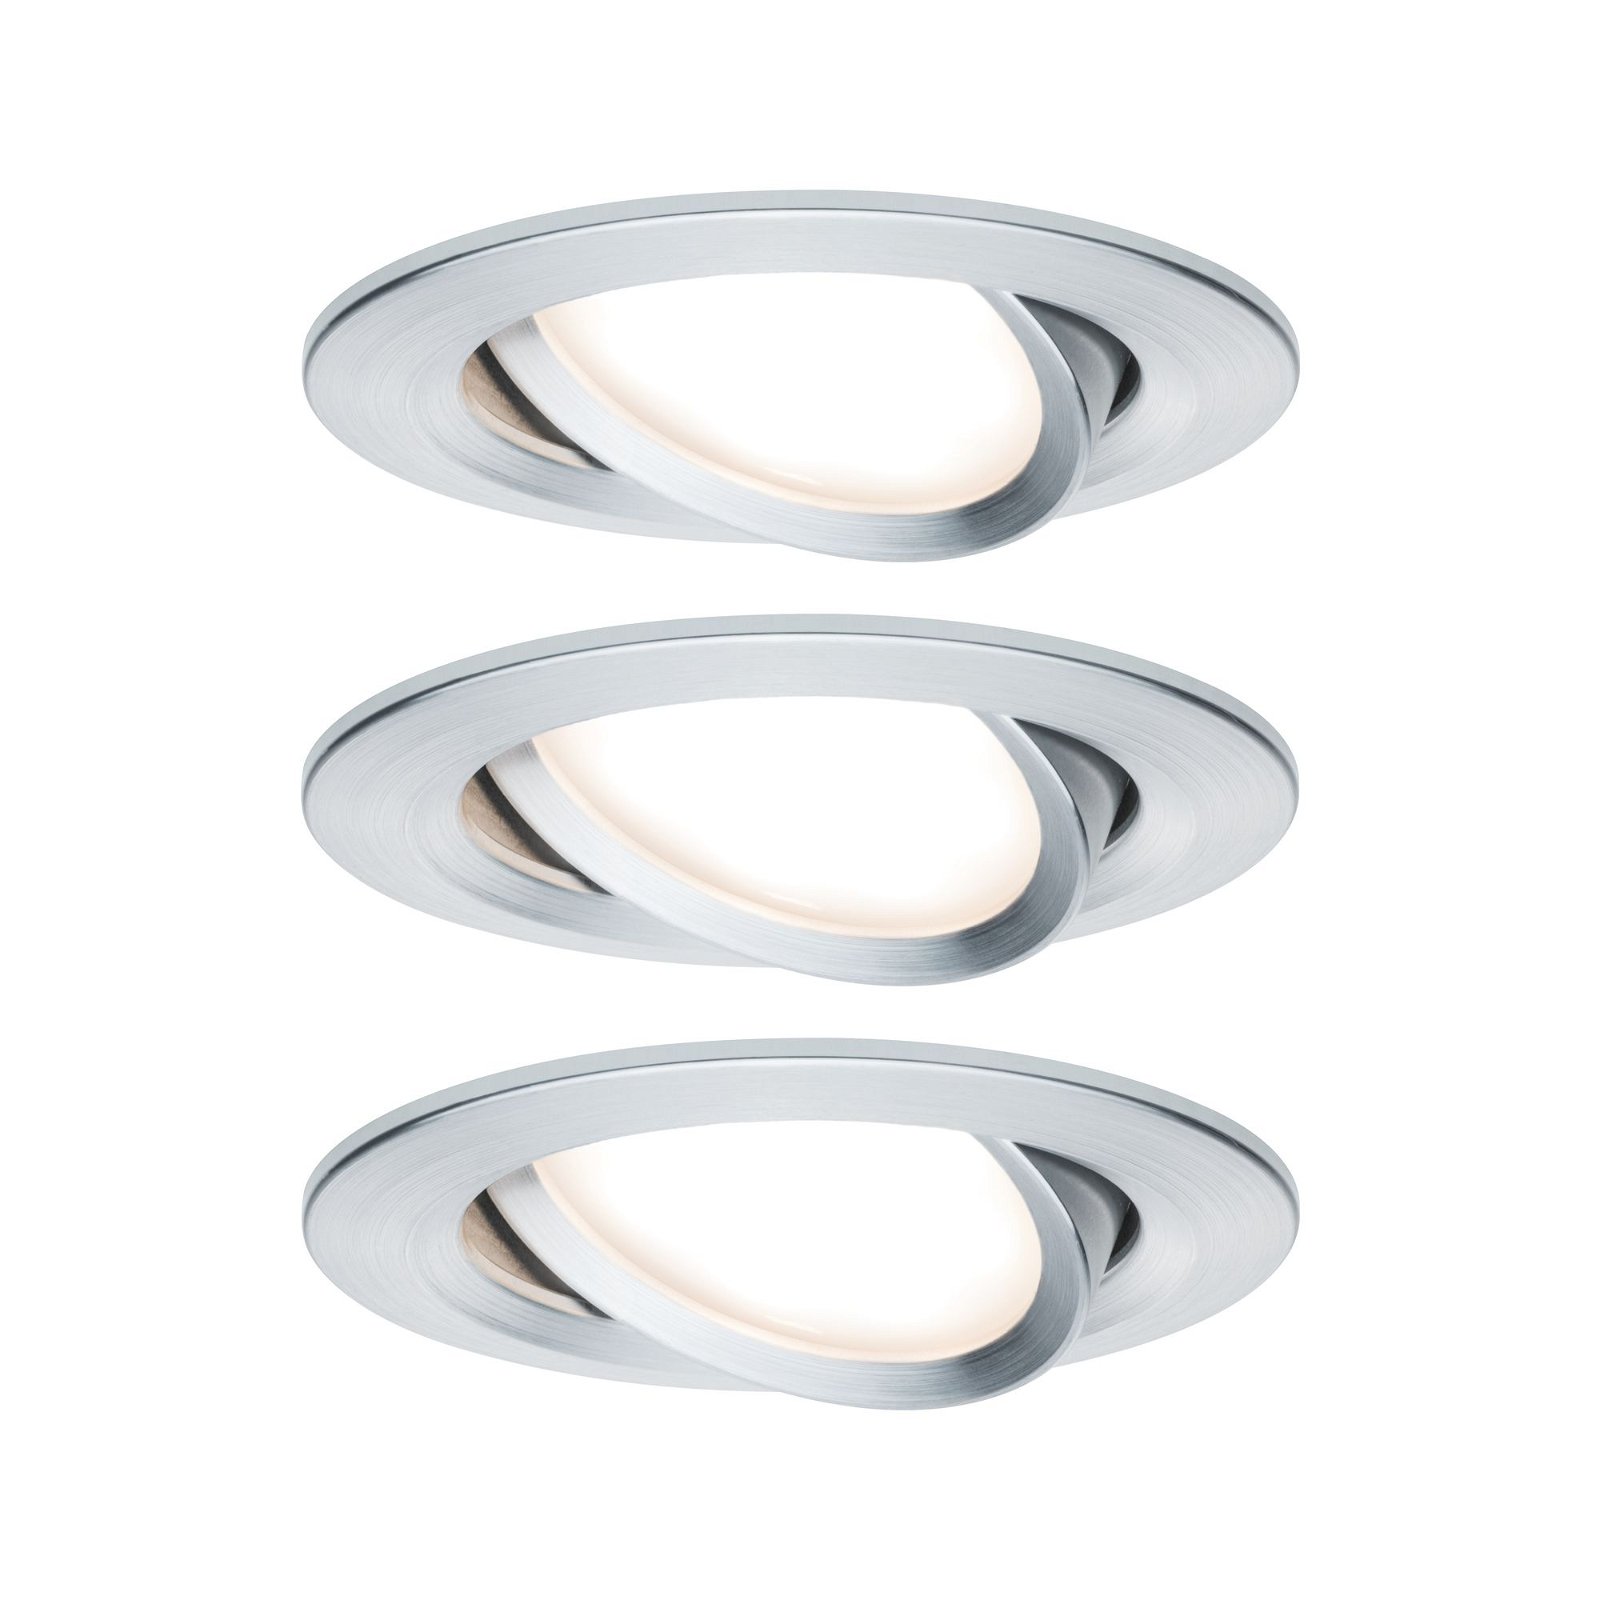 Recessed luminaire LED Coin Slim IP23 round 6.8 W aluminium 3-piece set, dimmable and swivelling